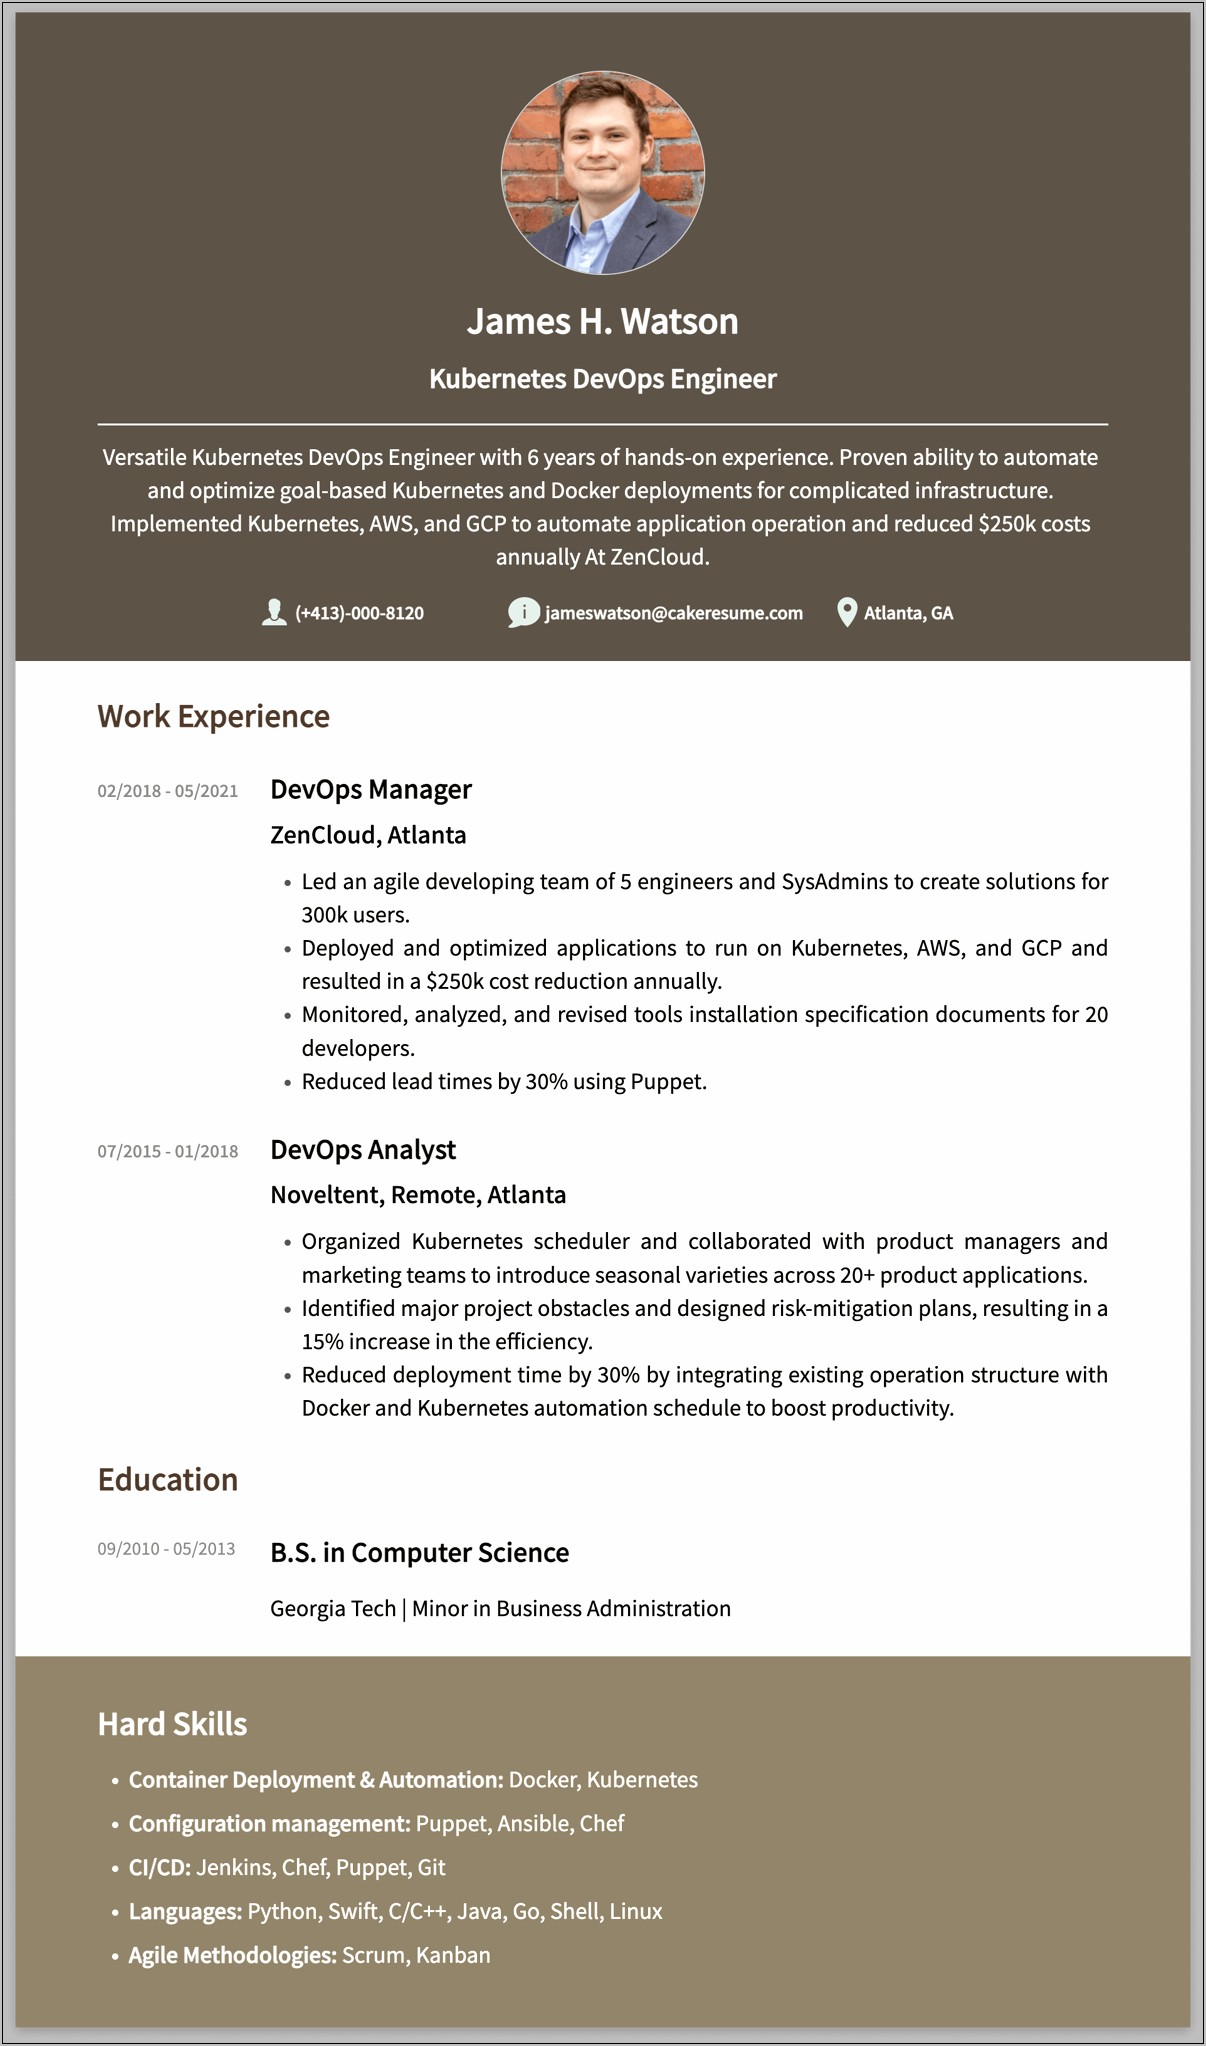 Resume Samples 2018 With References